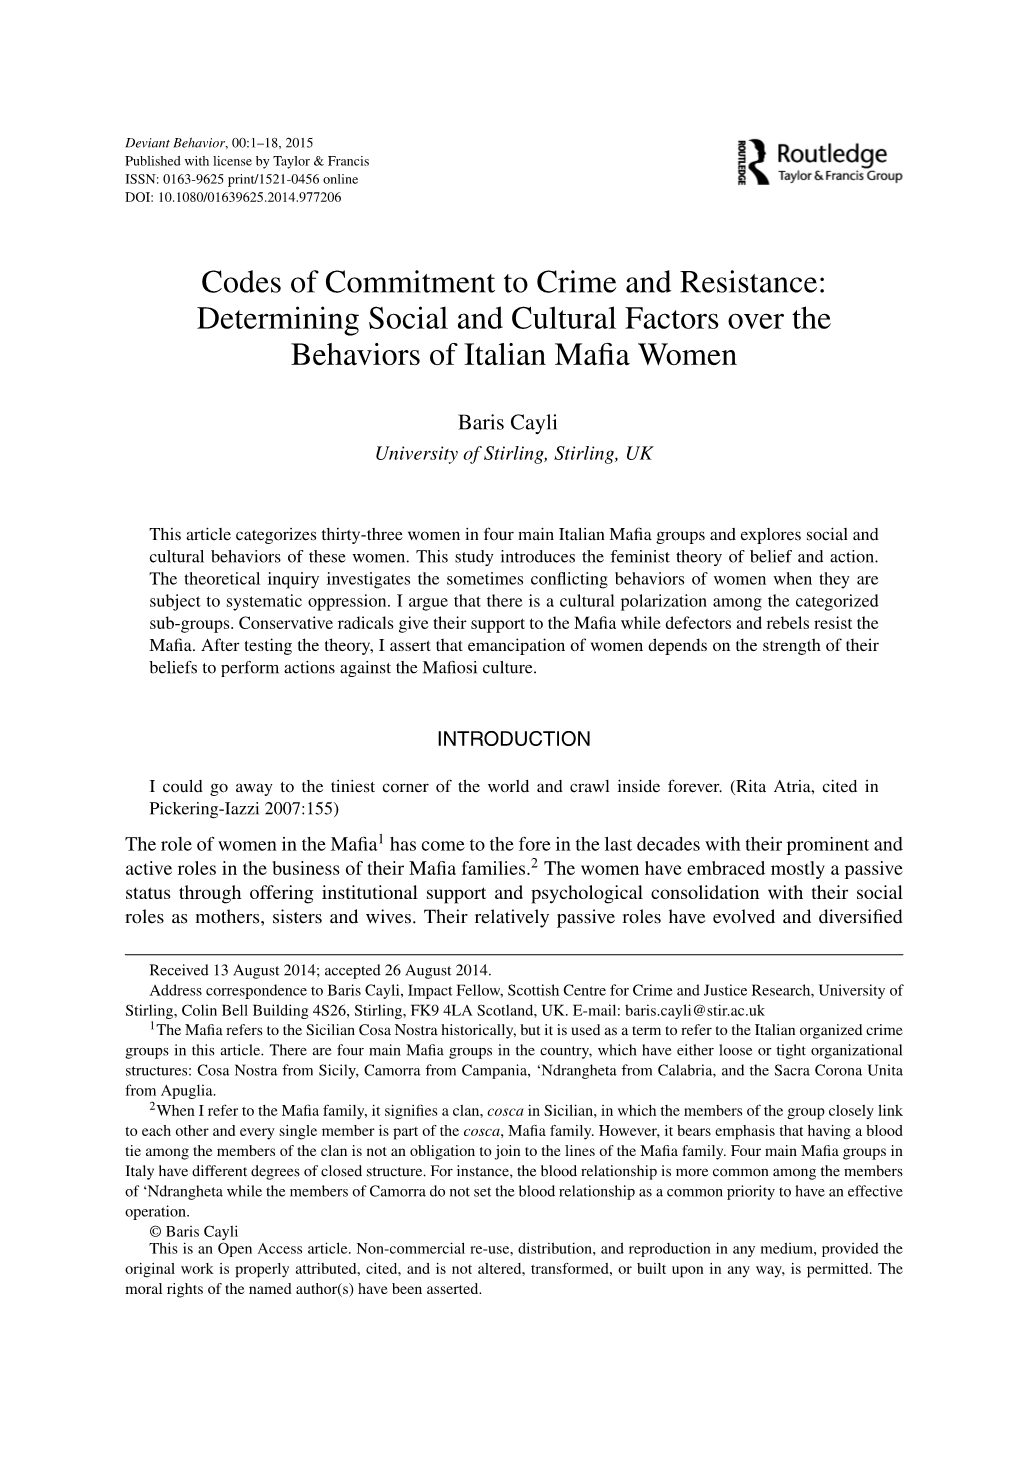 Codes of Commitment to Crime and Resistance: Determining Social and Cultural Factors Over the Behaviors of Italian Maﬁa Women